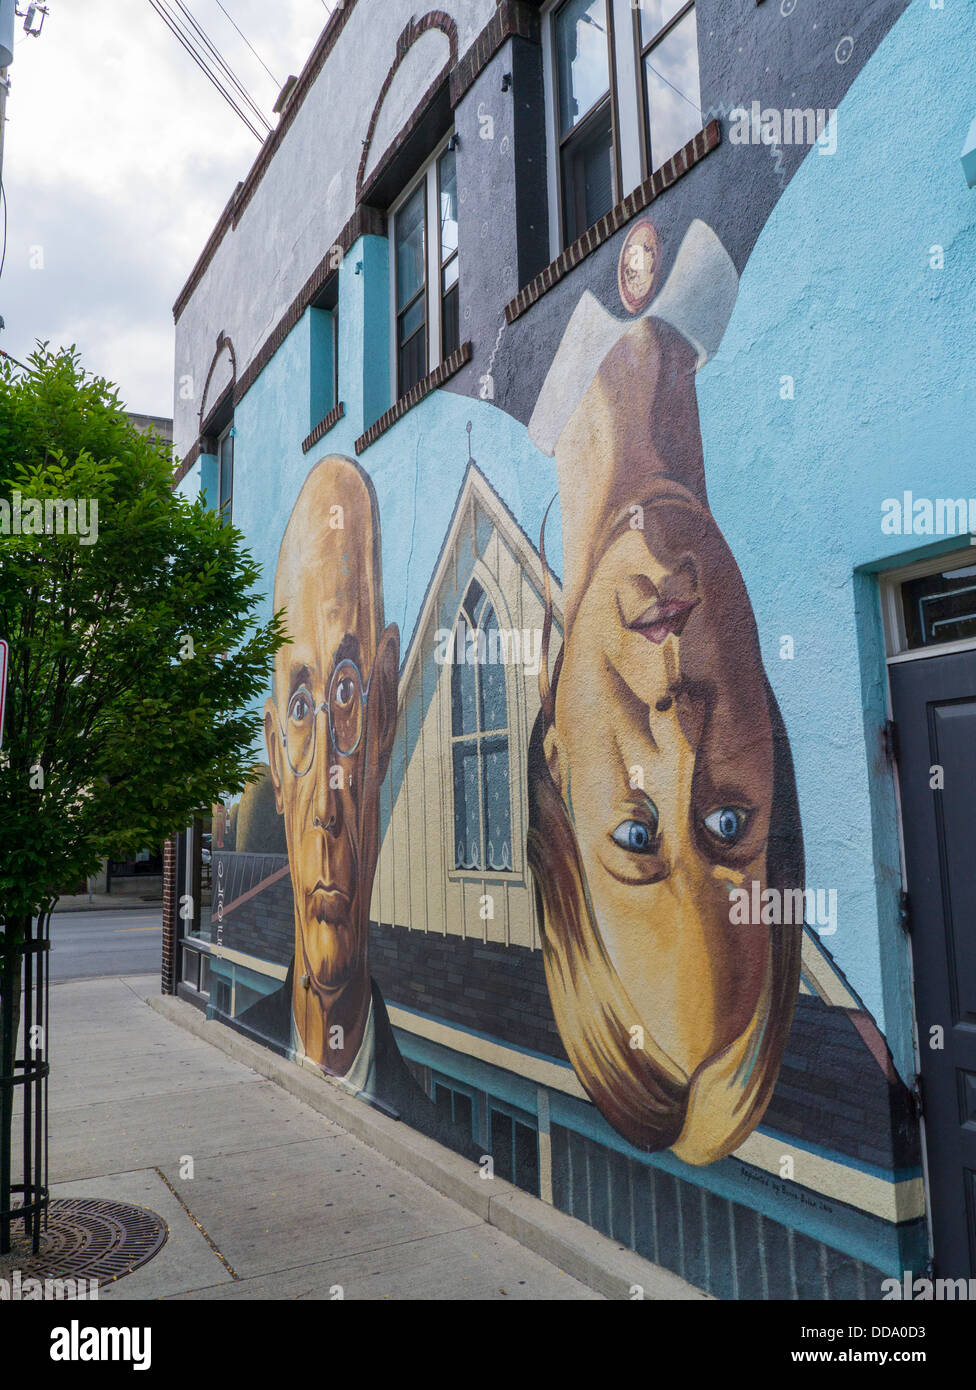 Grant Woods American Gothic mural painted on building in Short North area of Columbus Ohio United States Stock Photo